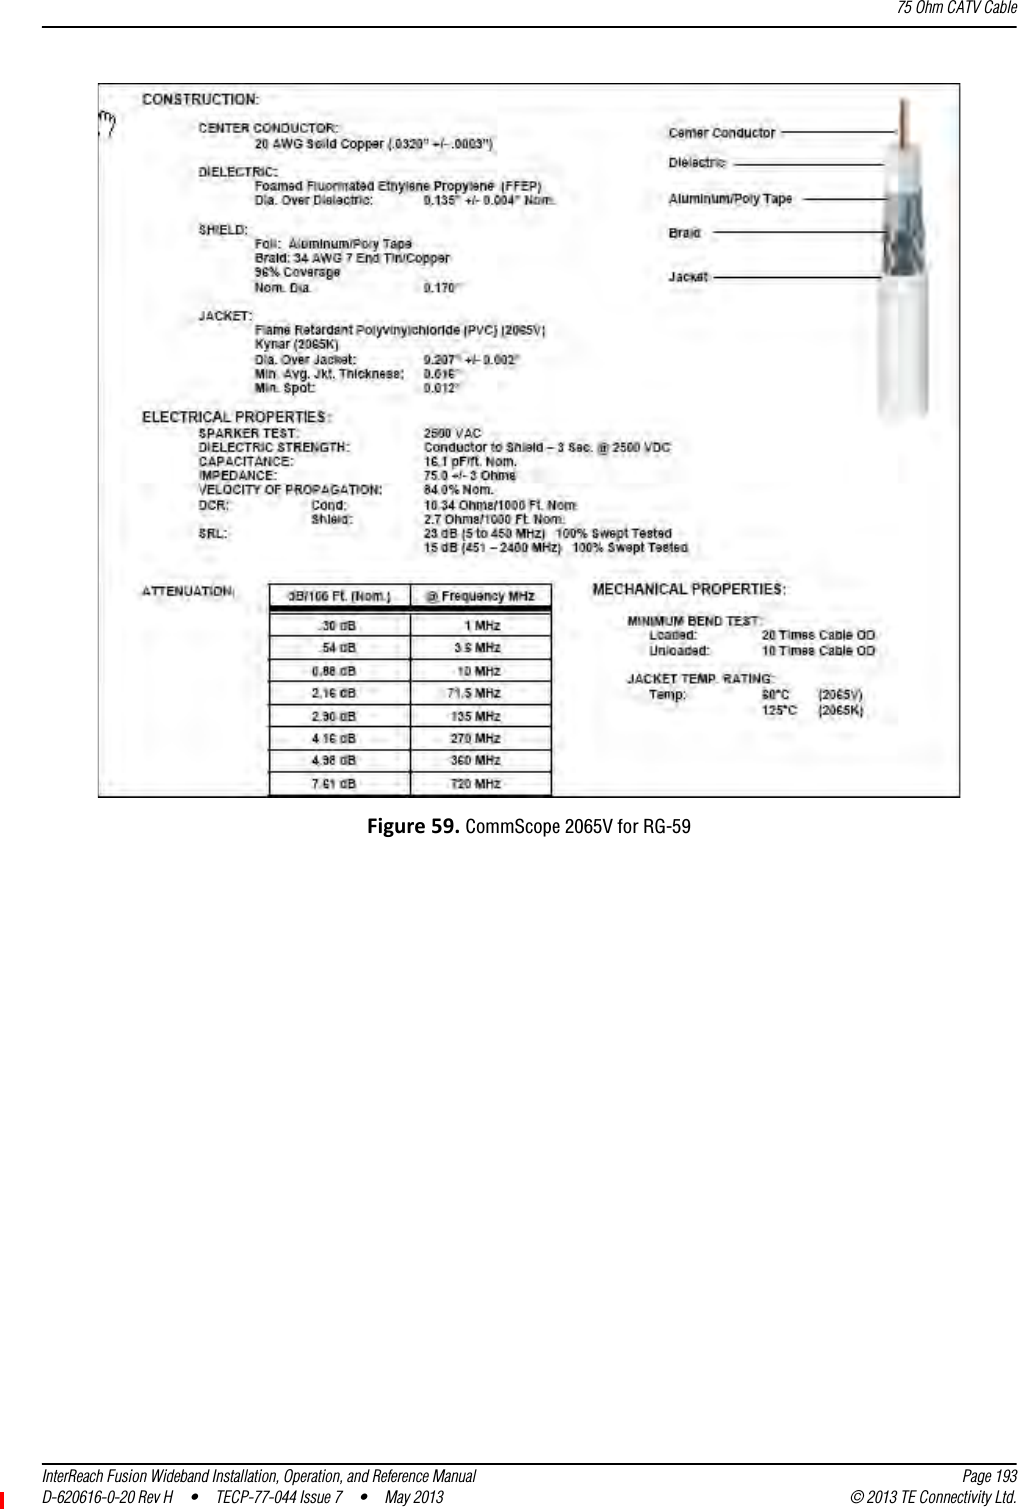 75 Ohm CATV CableInterReach Fusion Wideband Installation, Operation, and Reference Manual Page 193D-620616-0-20 Rev H • TECP-77-044 Issue 7  •  May 2013 © 2013 TE Connectivity Ltd.Figure59.CommScope 2065V for RG-59